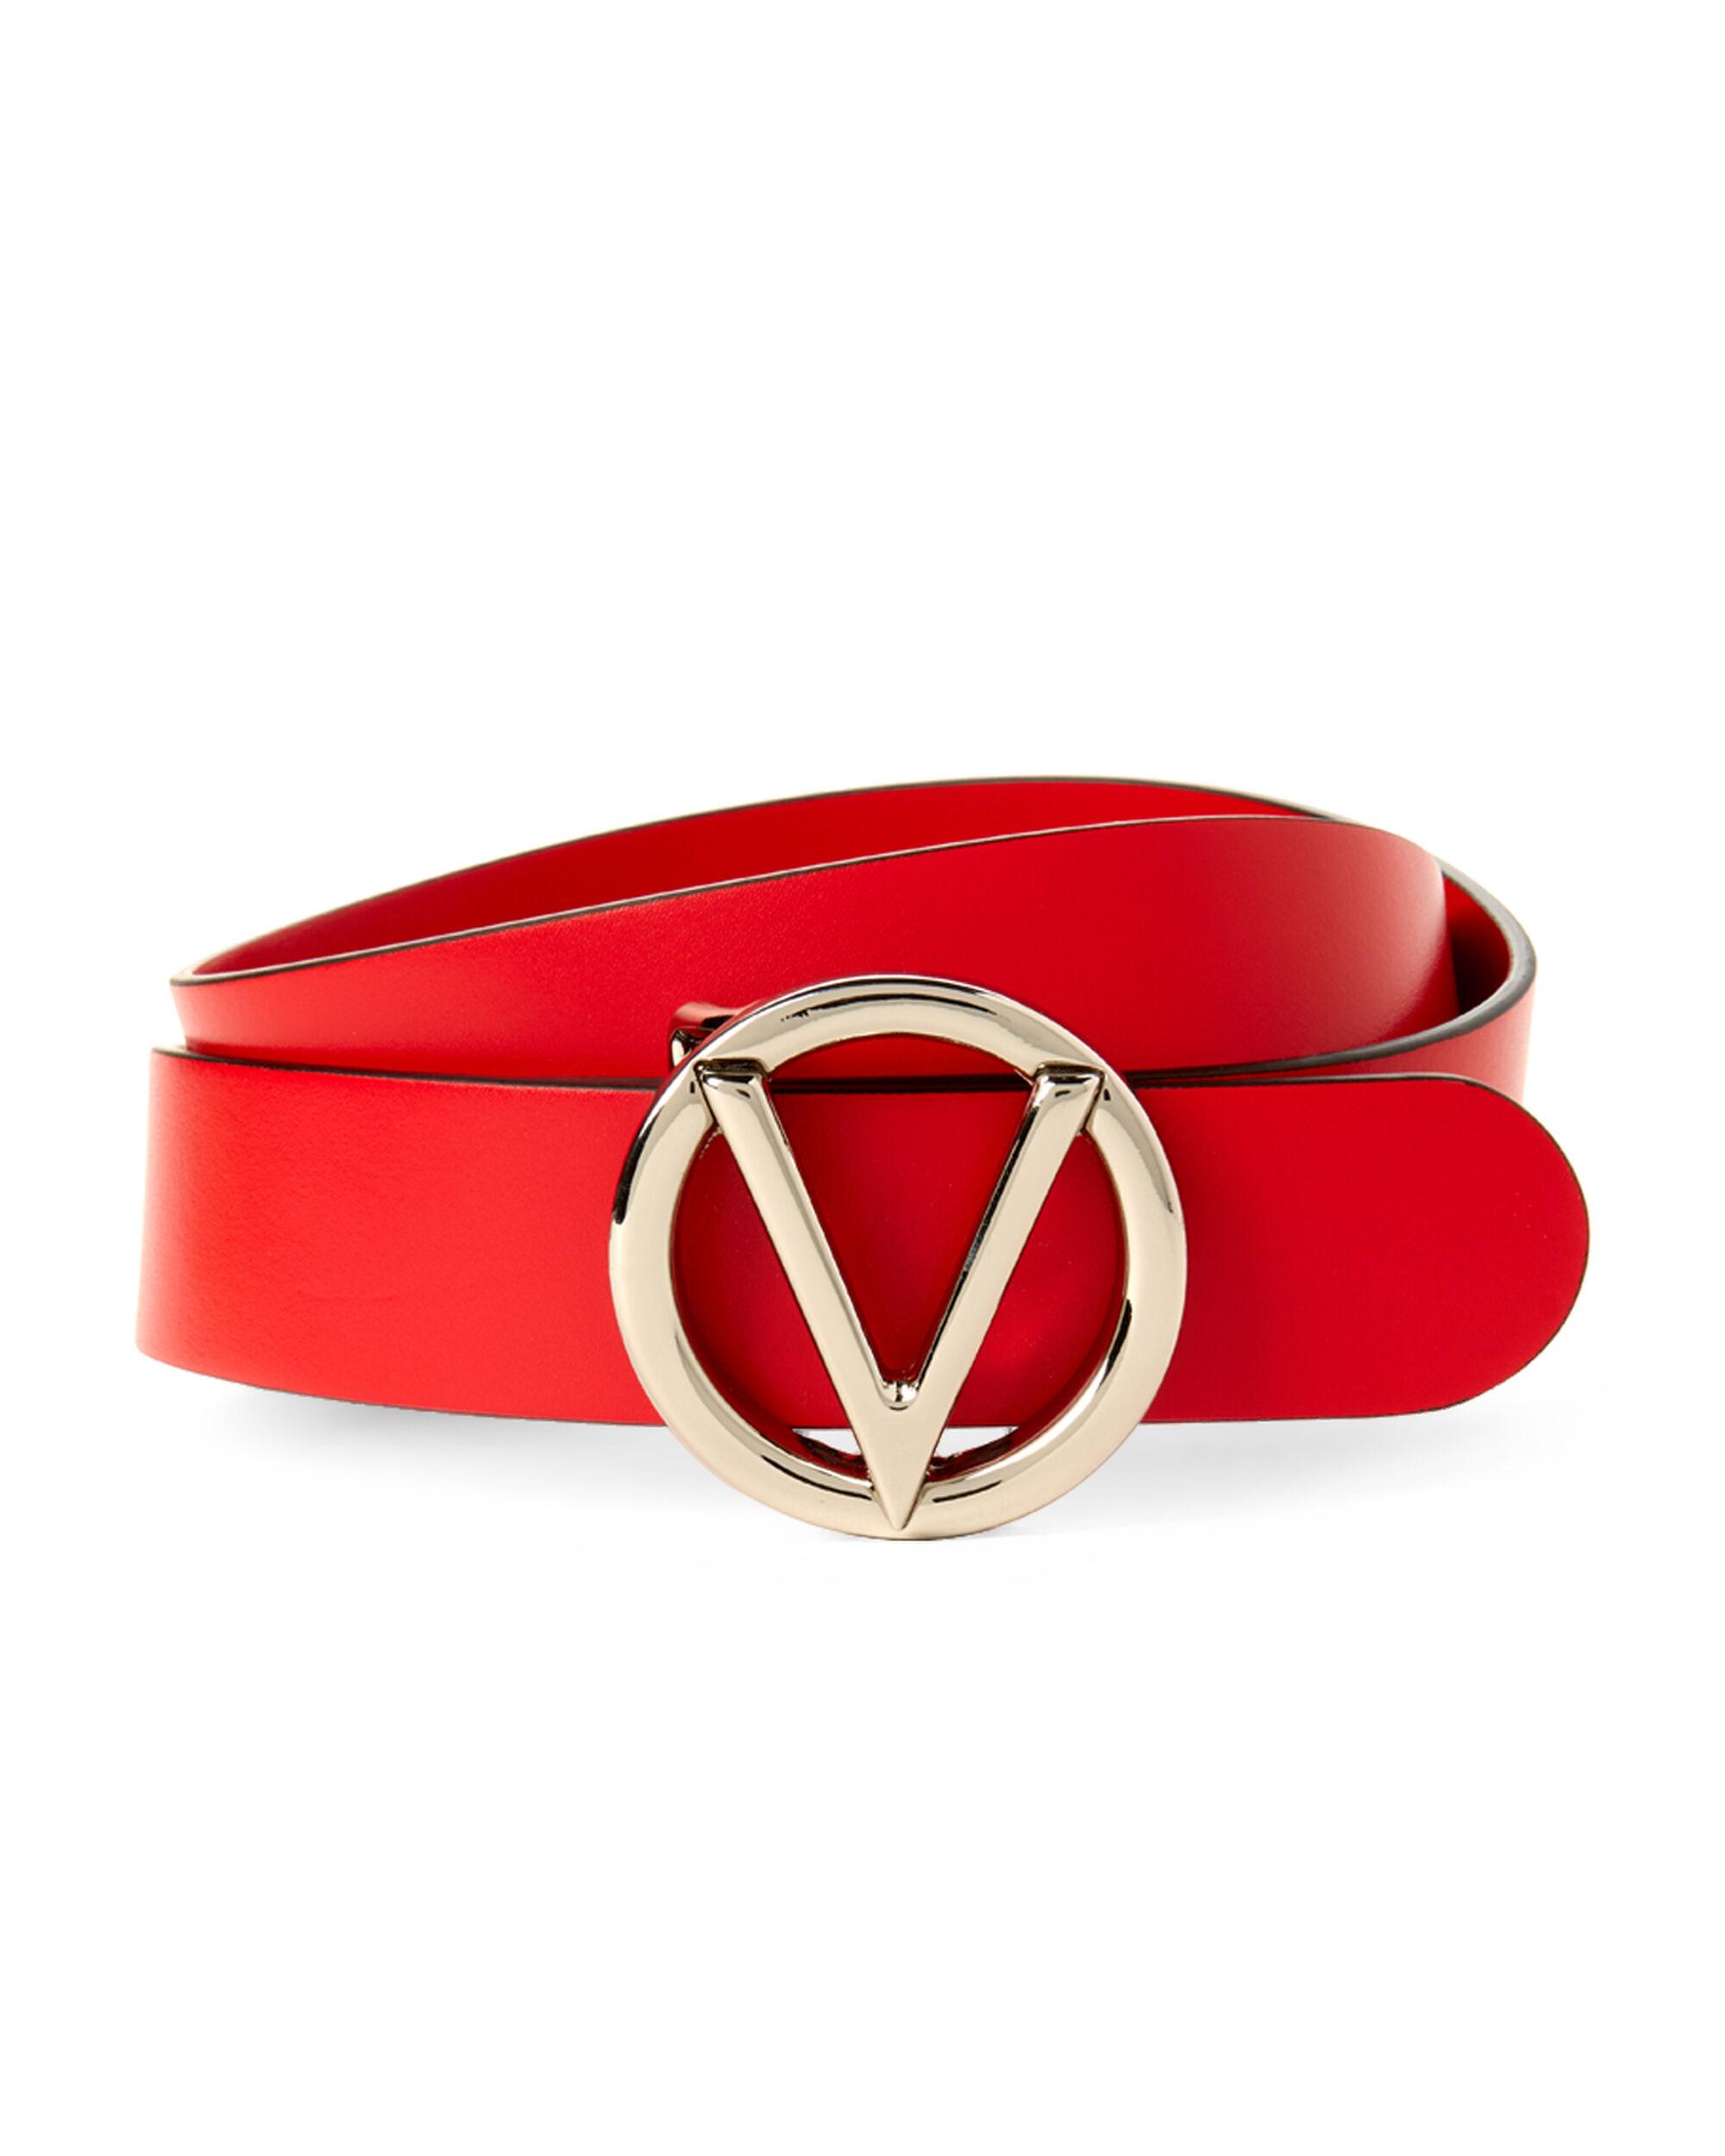 Valentino By Mario Valentino Lipstick Red Giusy Leather Belt in Red - Lyst